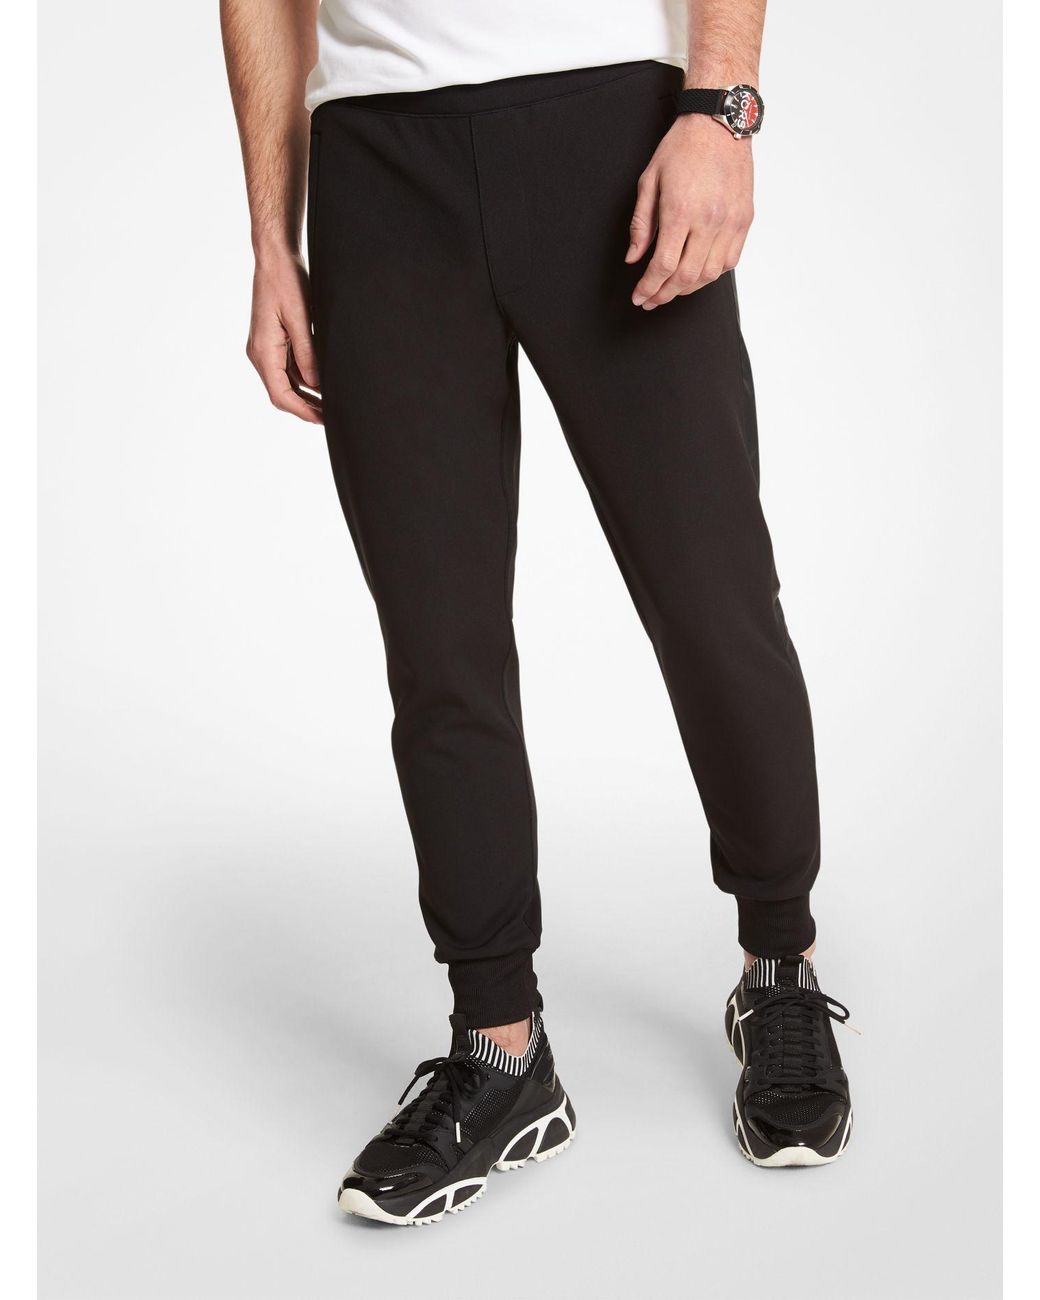 Michael Kors Synthetic Knit Joggers in Black for Men - Lyst